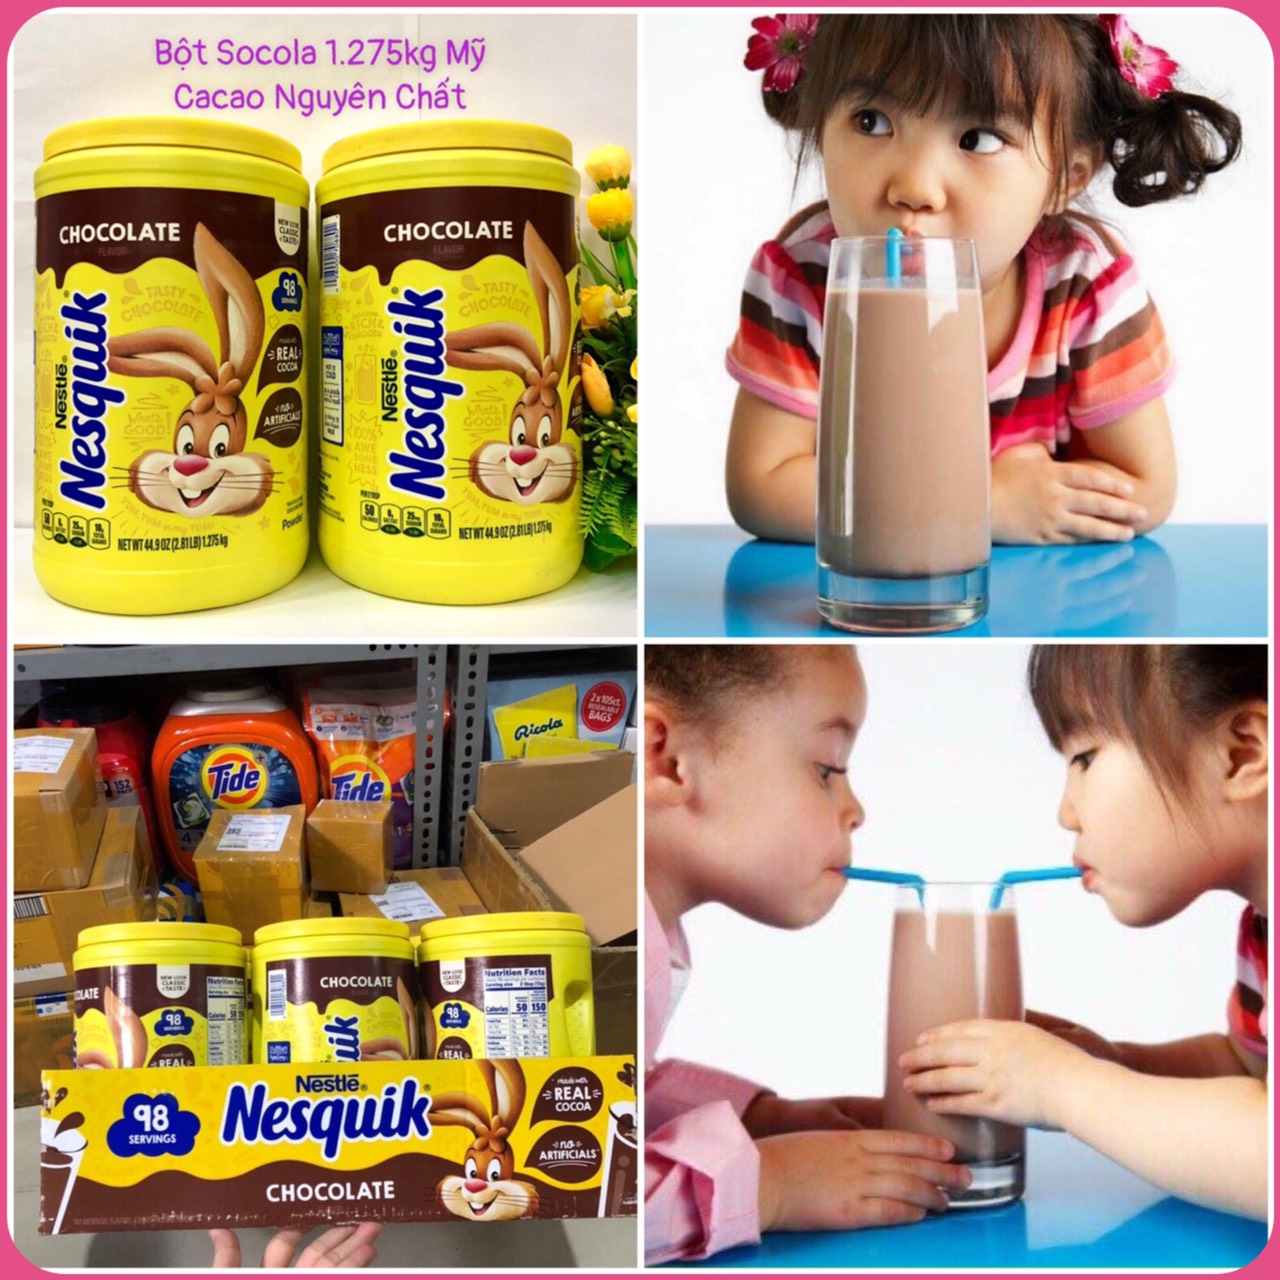 Quận 3 Bột Cacao Socola Nestle Nesquik Chocolate 1.275 kg Mỹ Date Mới 6